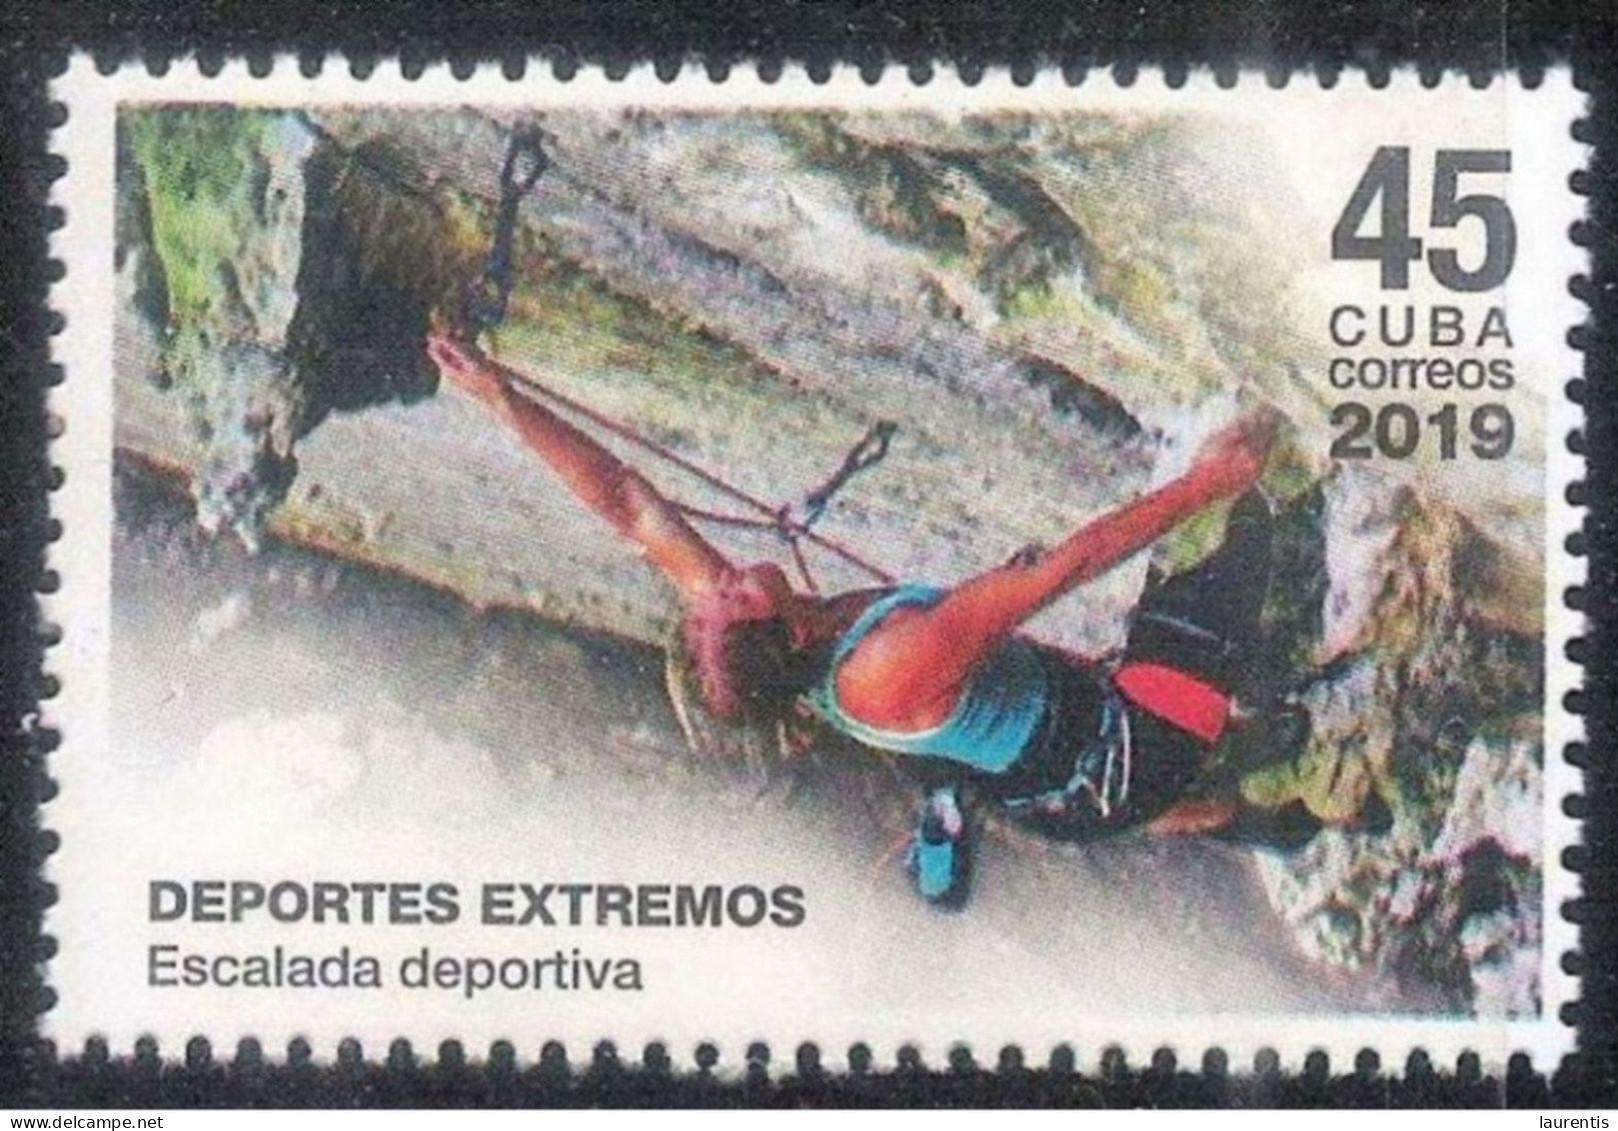 1253  Climbing - Only This One In The Stamp Set - MNH - Cb - 1,25 - Climbing